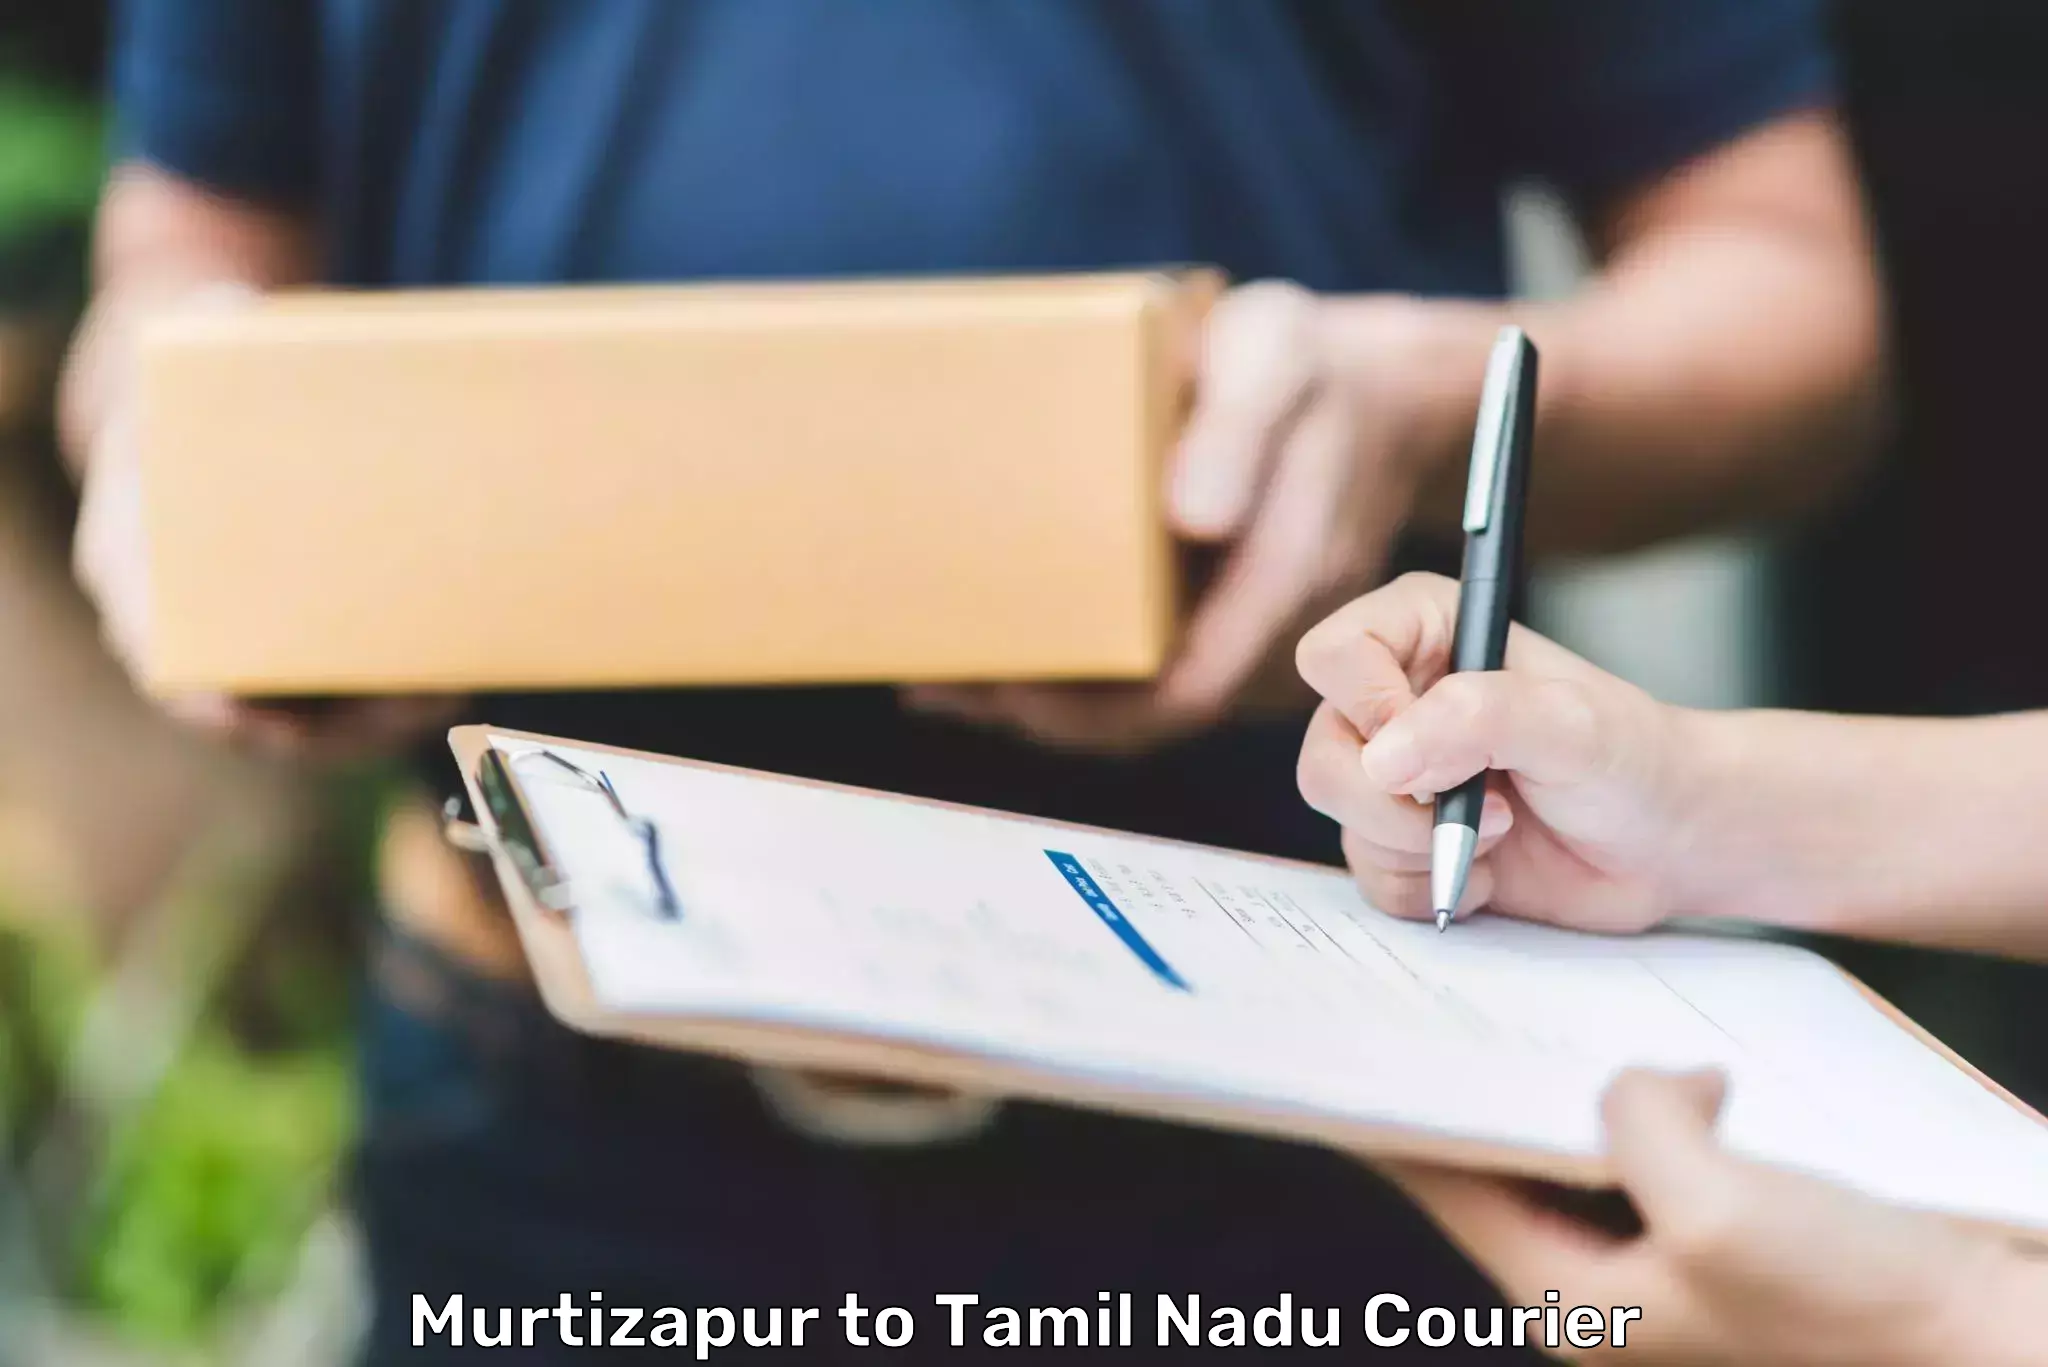 Package consolidation Murtizapur to Tamil Nadu